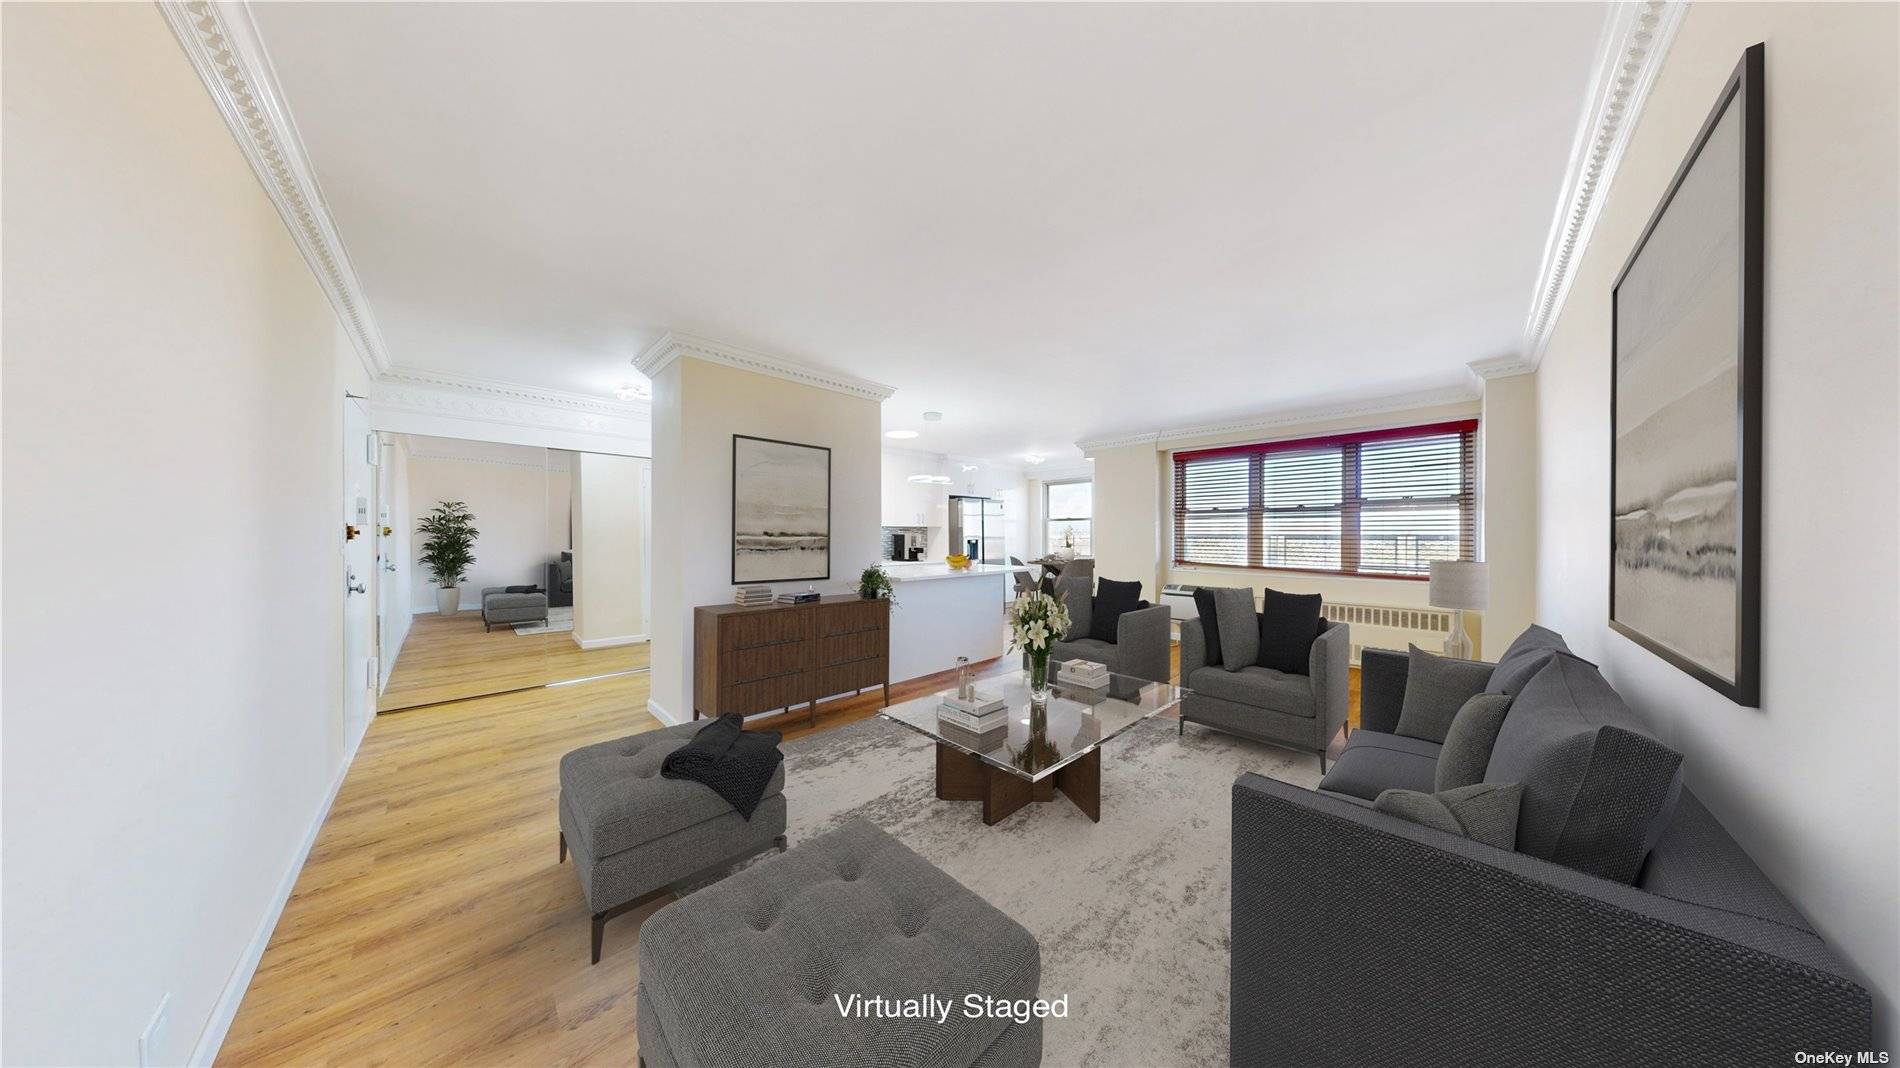 Discover city living at its finest in this fully renovated 2 bedroom, 1 bath coop at 2483 West 16th Street.